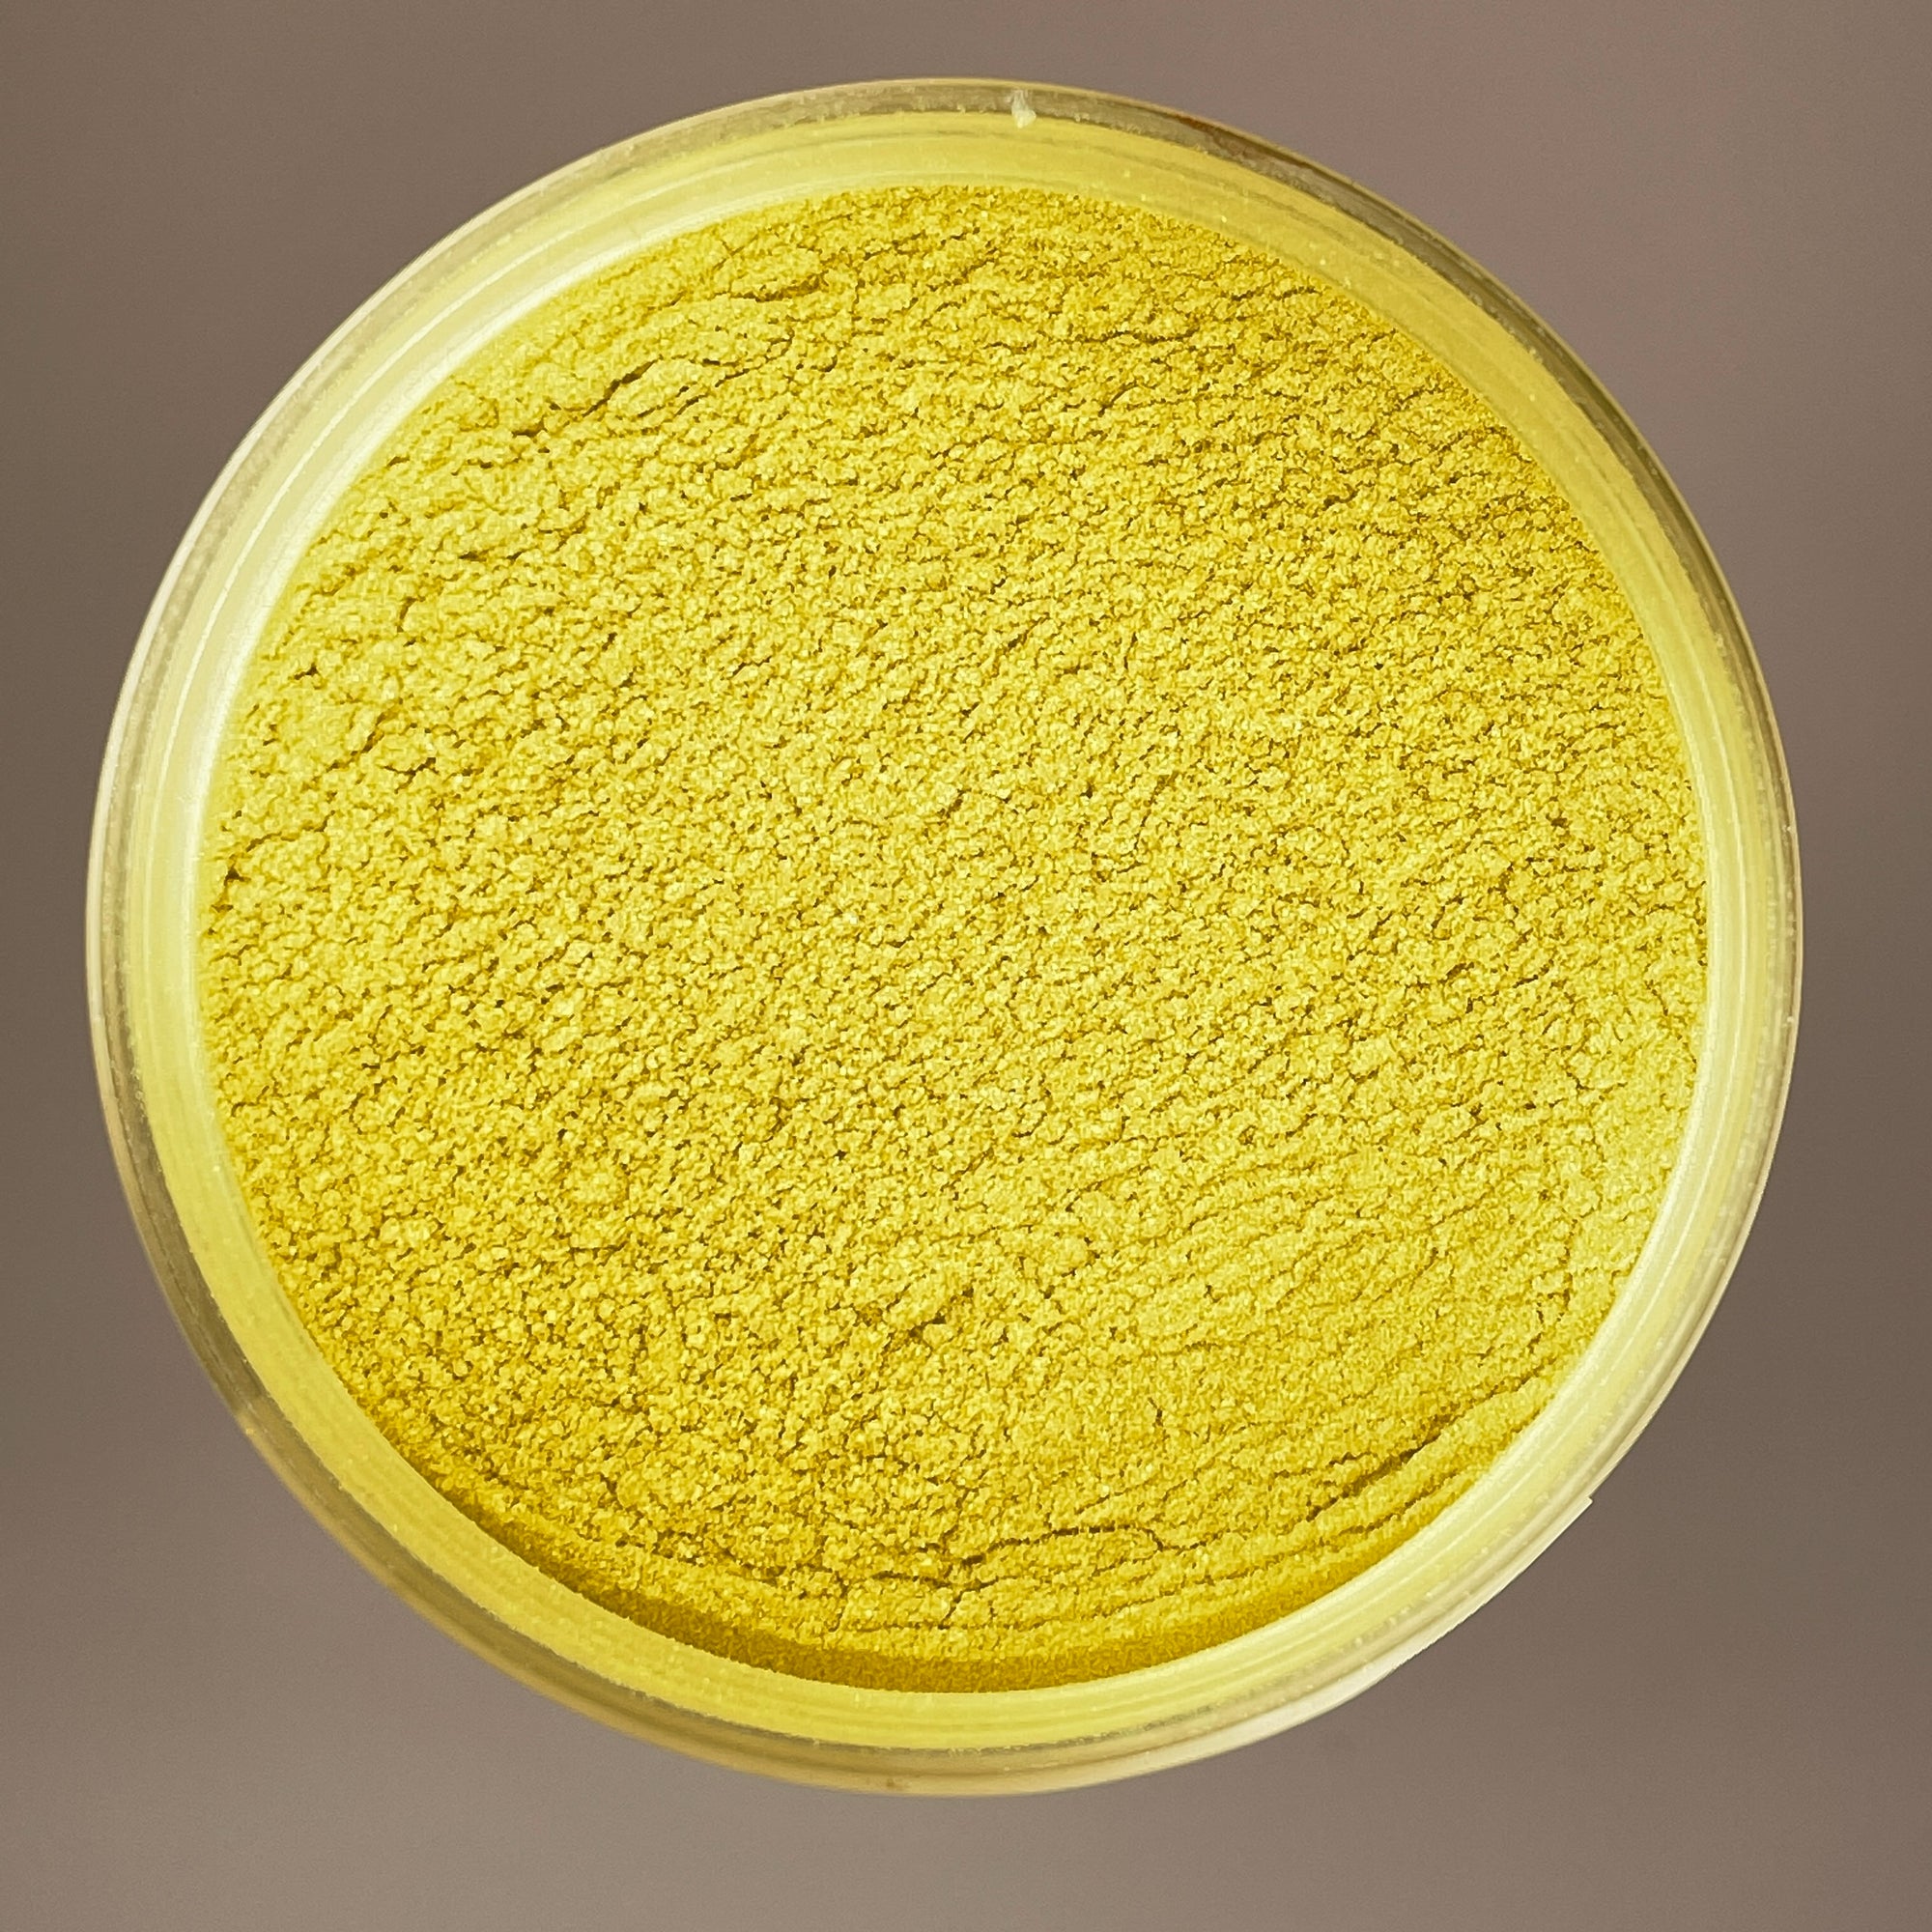 birds eye view shot of mica powder pigment that is a bright yellow colour just like the sun